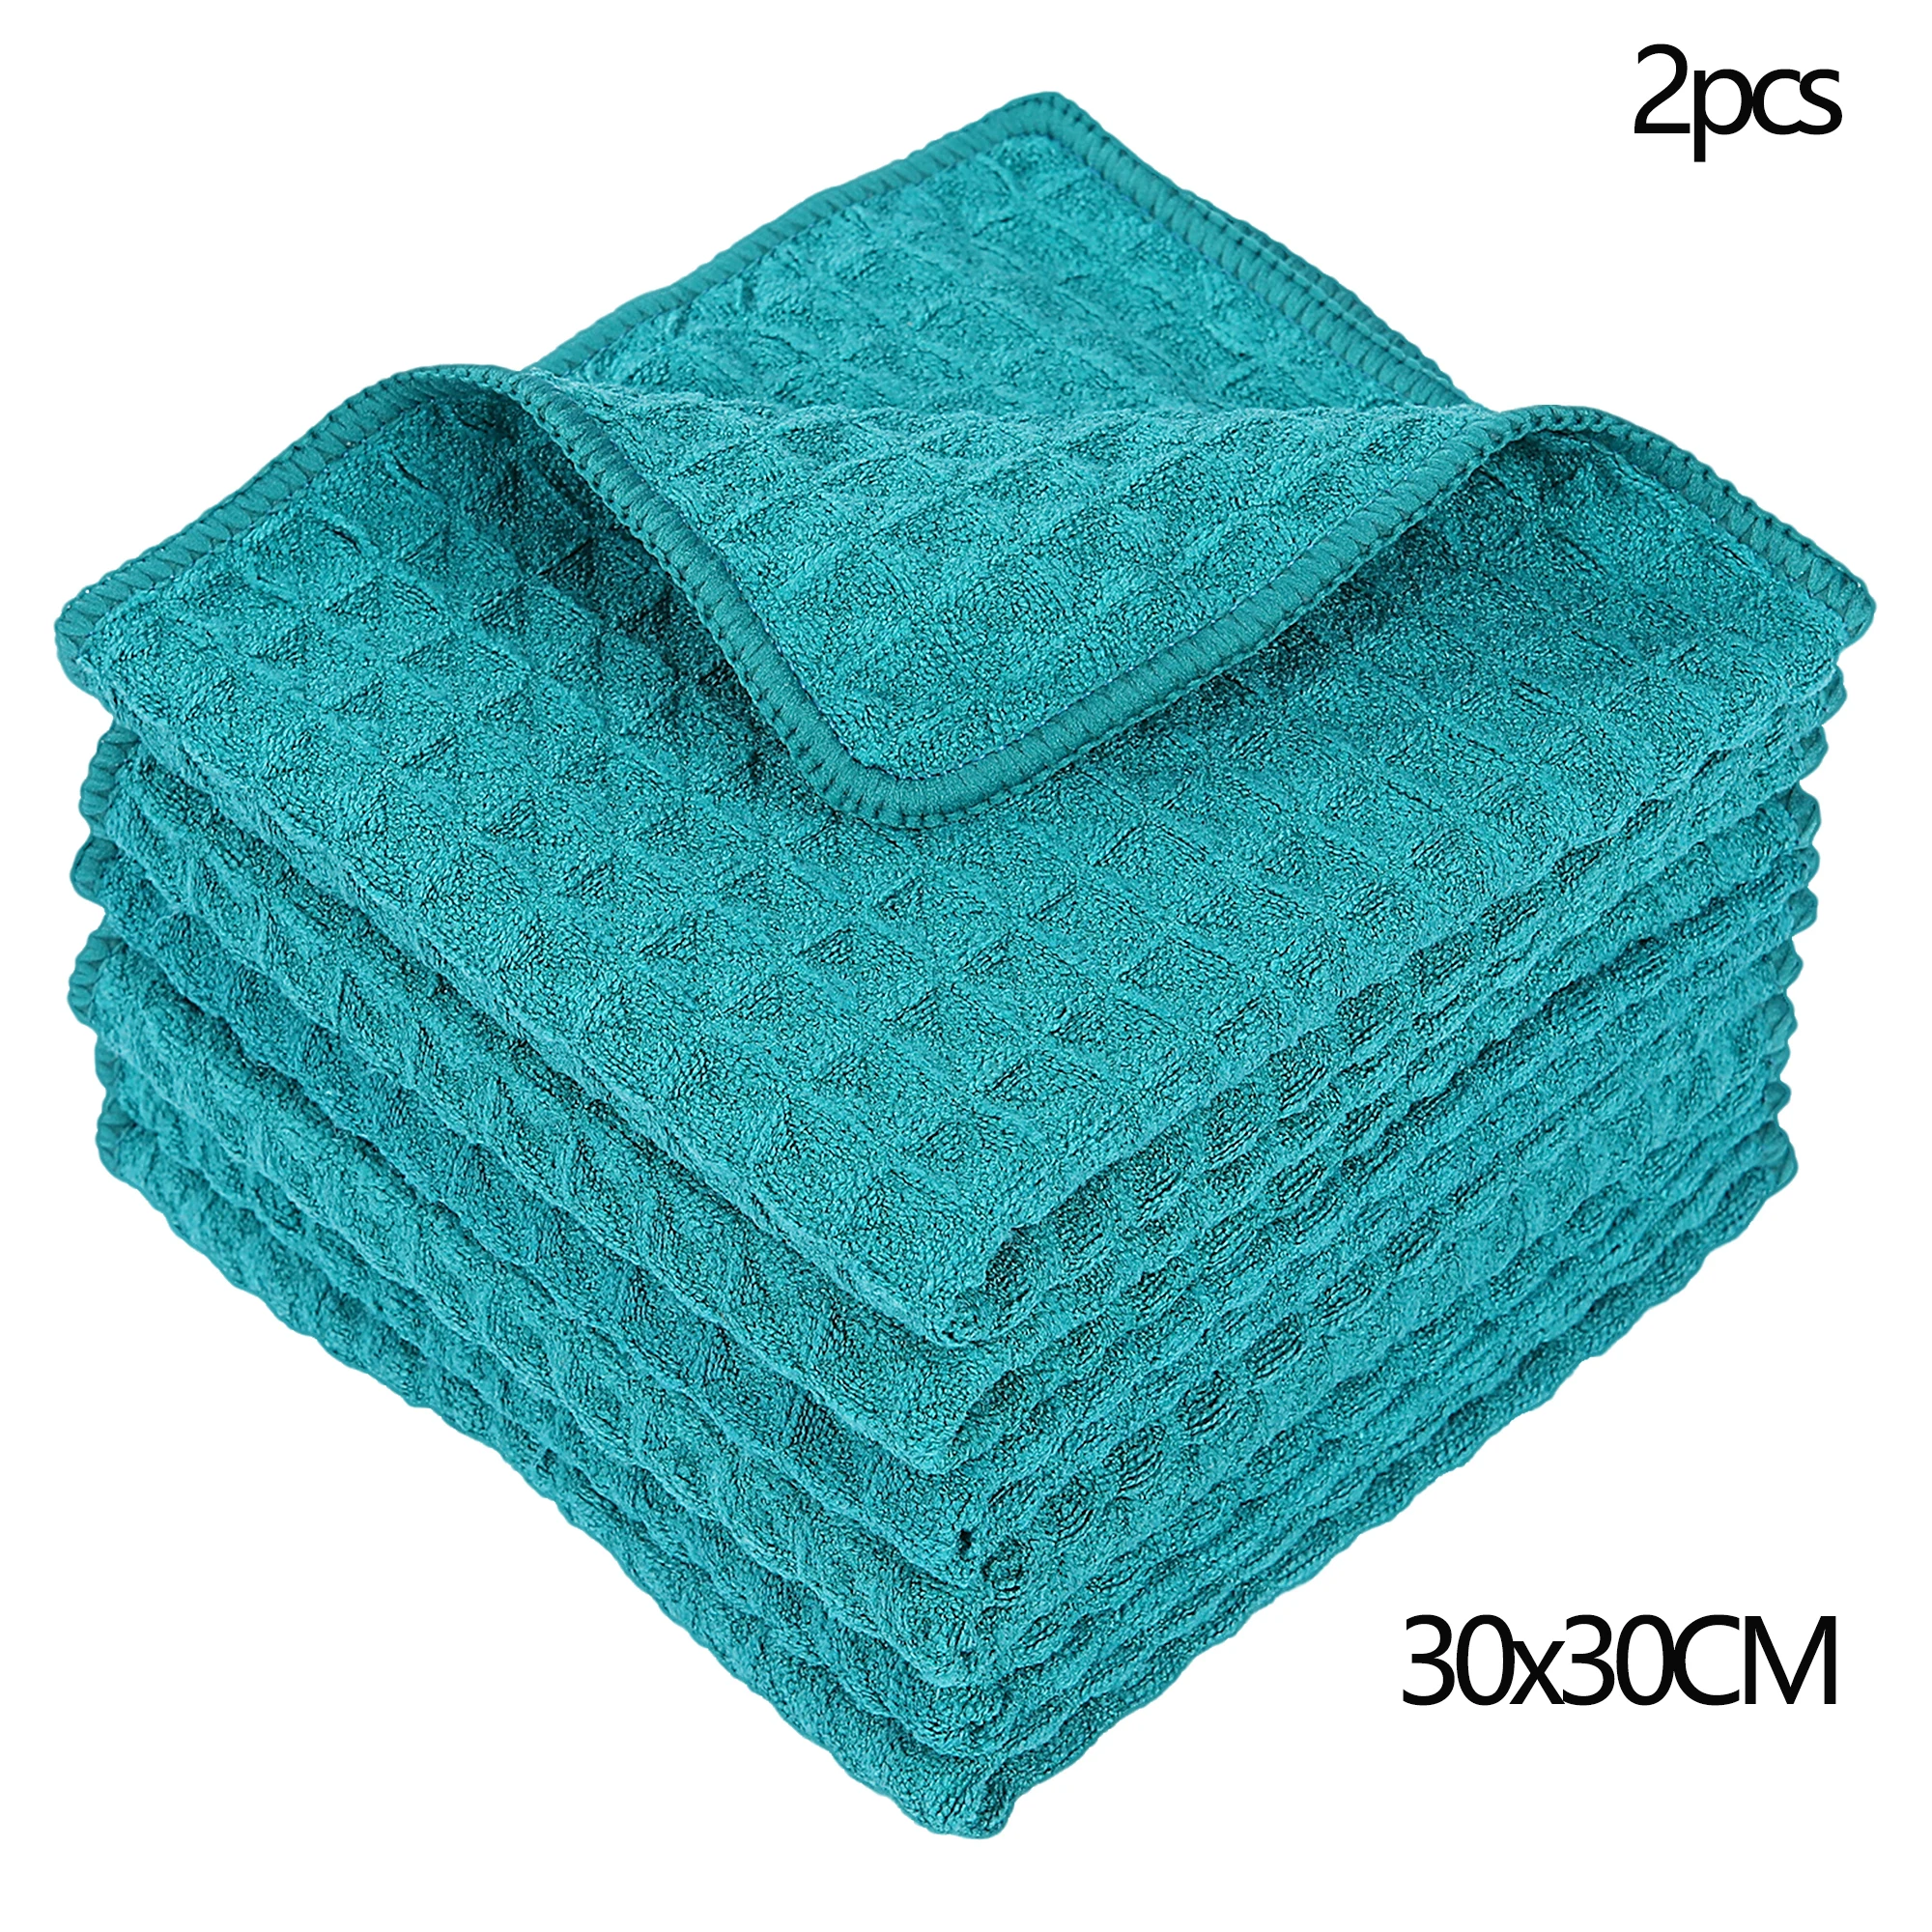 https://ae01.alicdn.com/kf/S293323635b9543a889eab6d075e1cd6a2/Homaxy-2pcs-Microfiber-Kitchen-Towel-Waffle-Weave-Dishcloth-Absorbent-Kitchen-Cloths-Fast-Drying-Scouring-Pad-Cleaning.jpg